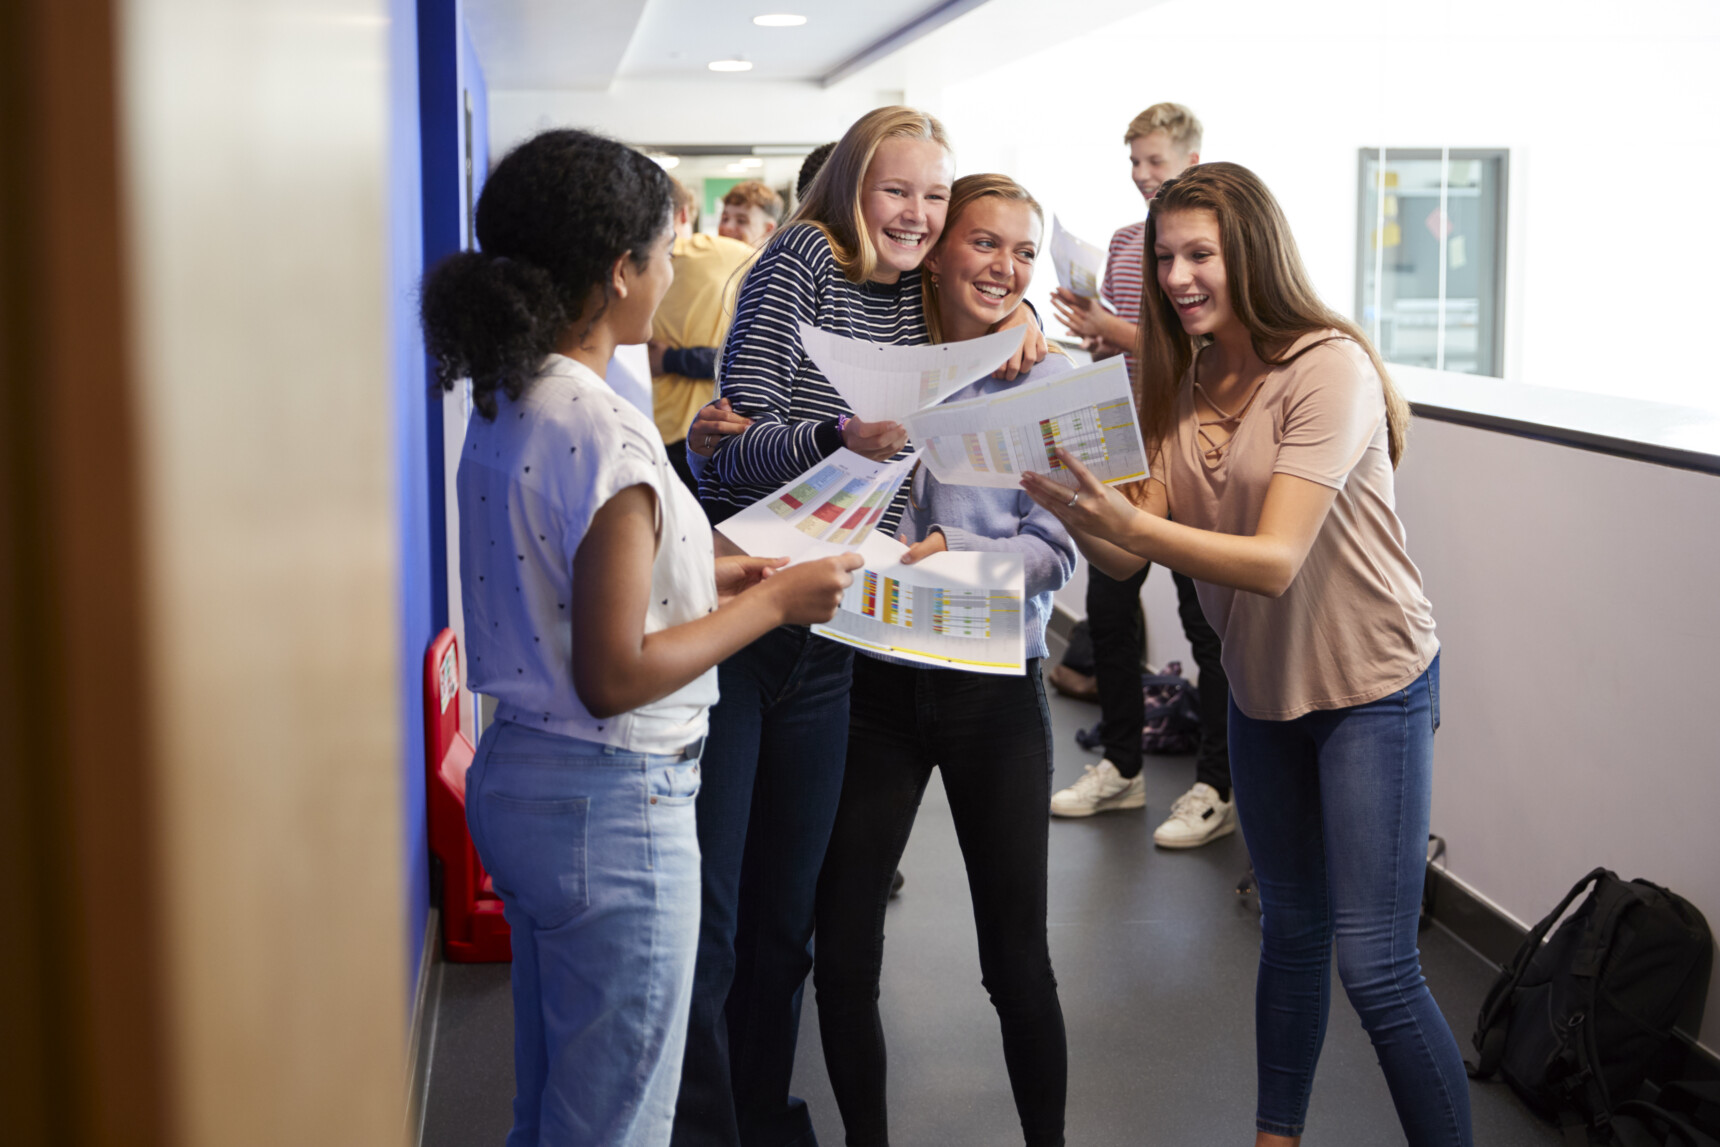 Students hugging and celebrating their A Level exam results.